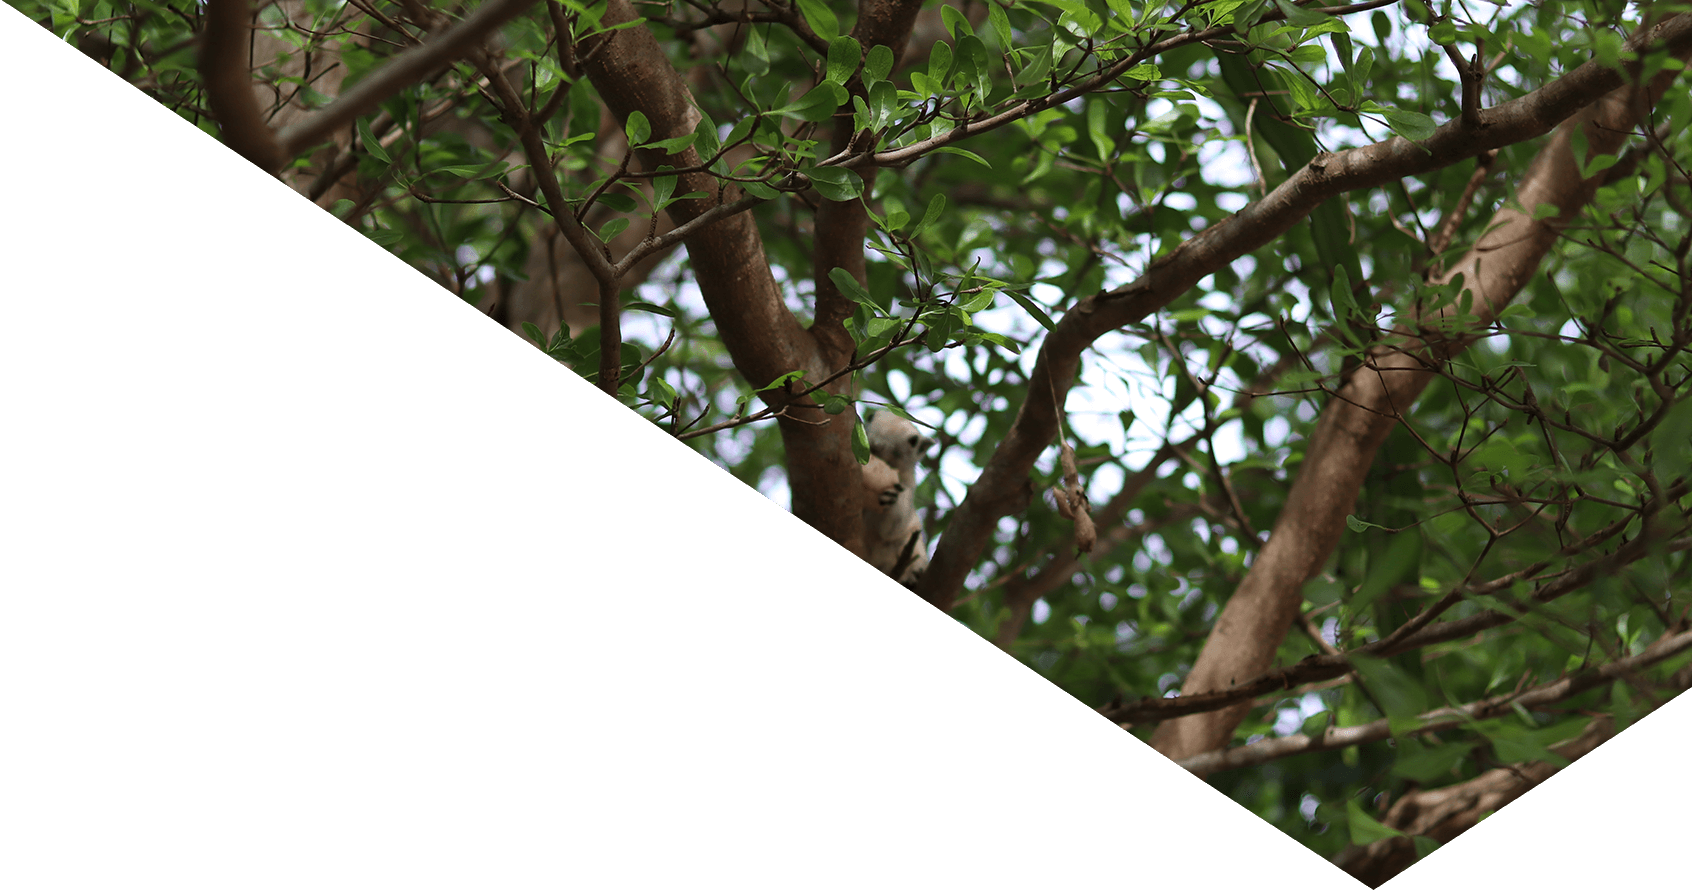 Image showing a close-up of a tree